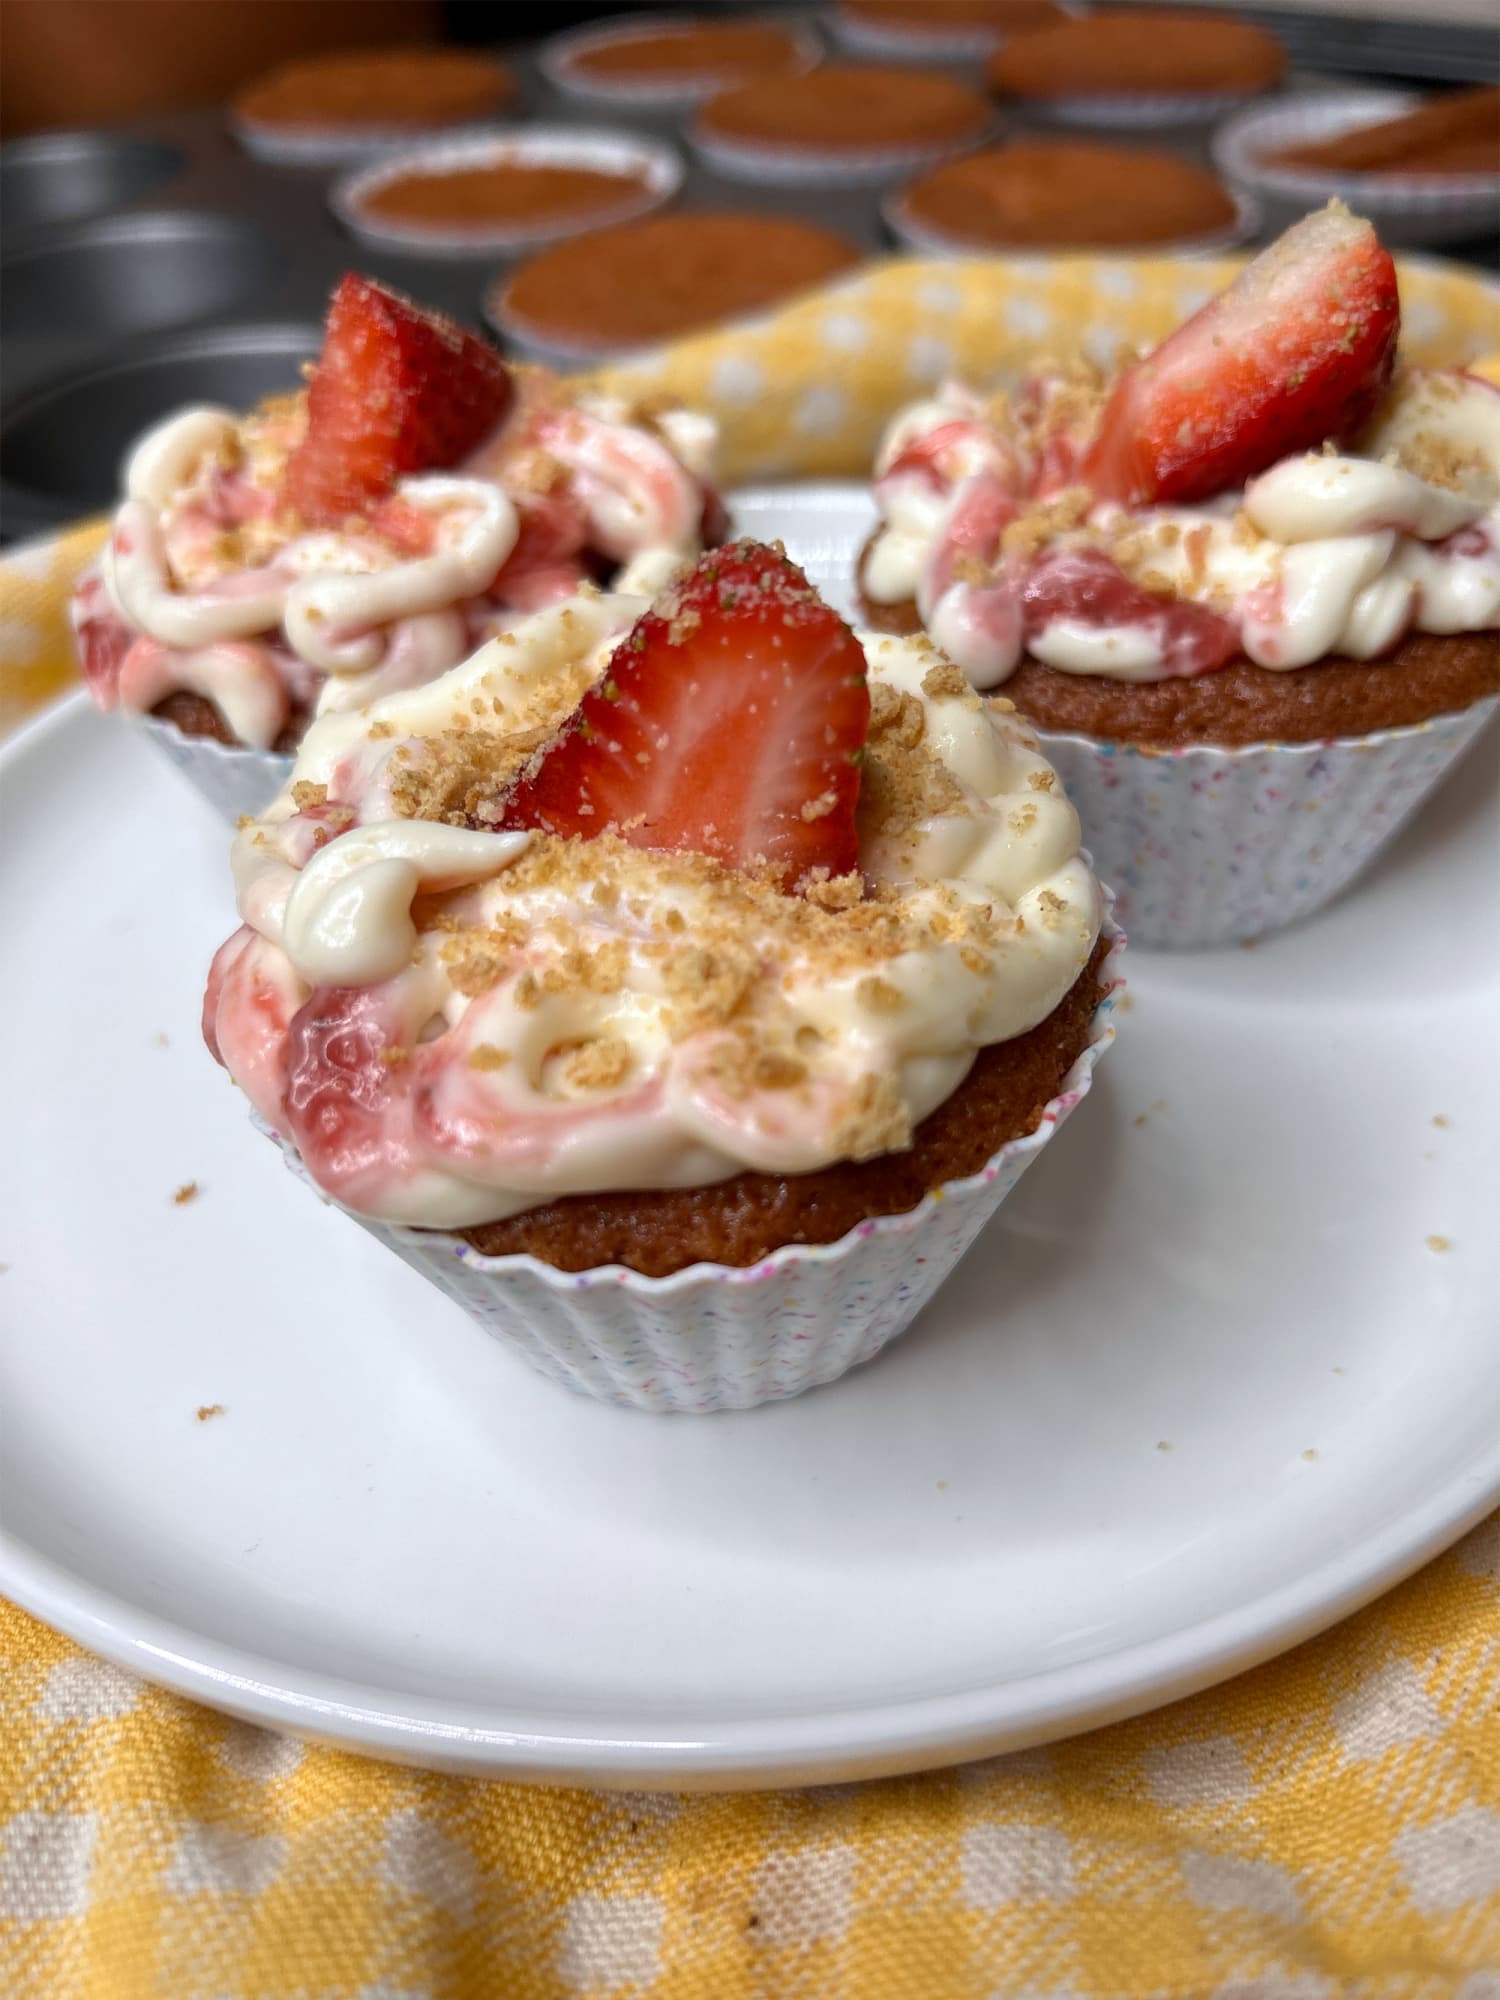 I Tried King Arthur’s Strawberry Cheesecake Cupcake Recipe, and It’s a Keeper